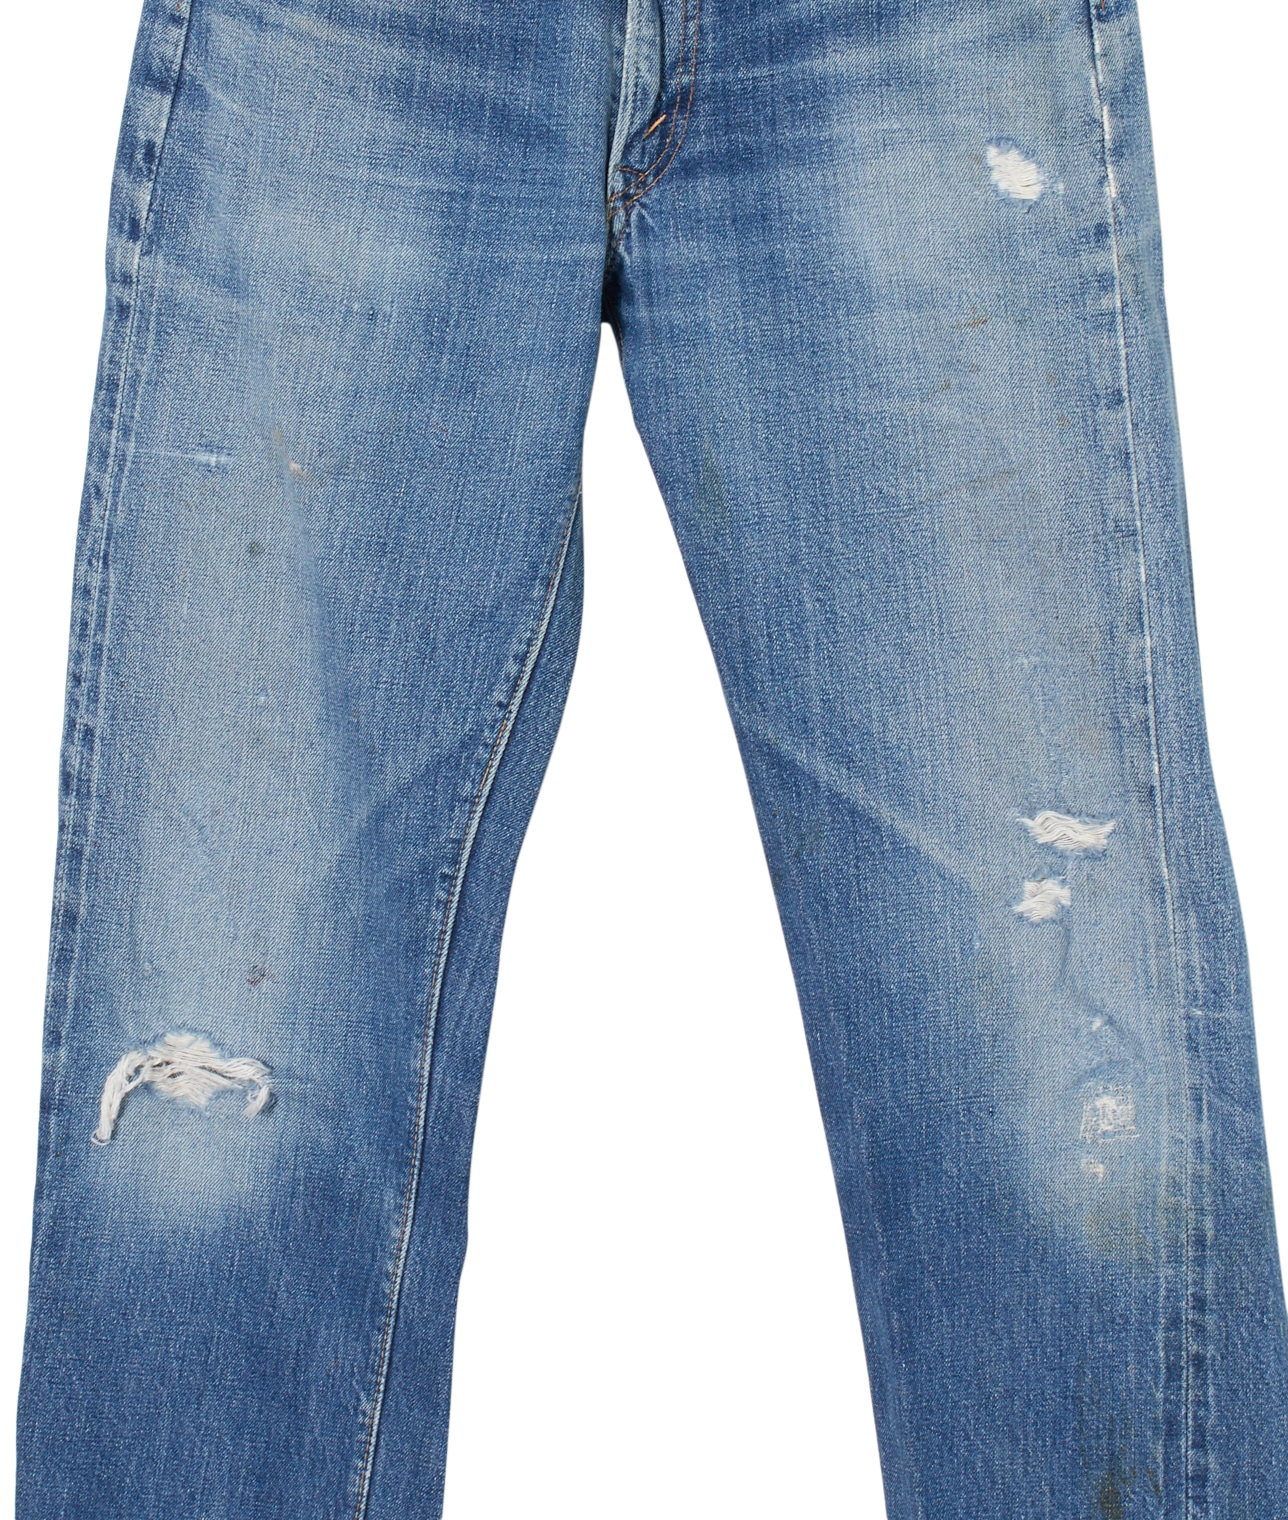 USED/LEVI'S 502 BIG E AS-IS 詳細画像 BLUE 4